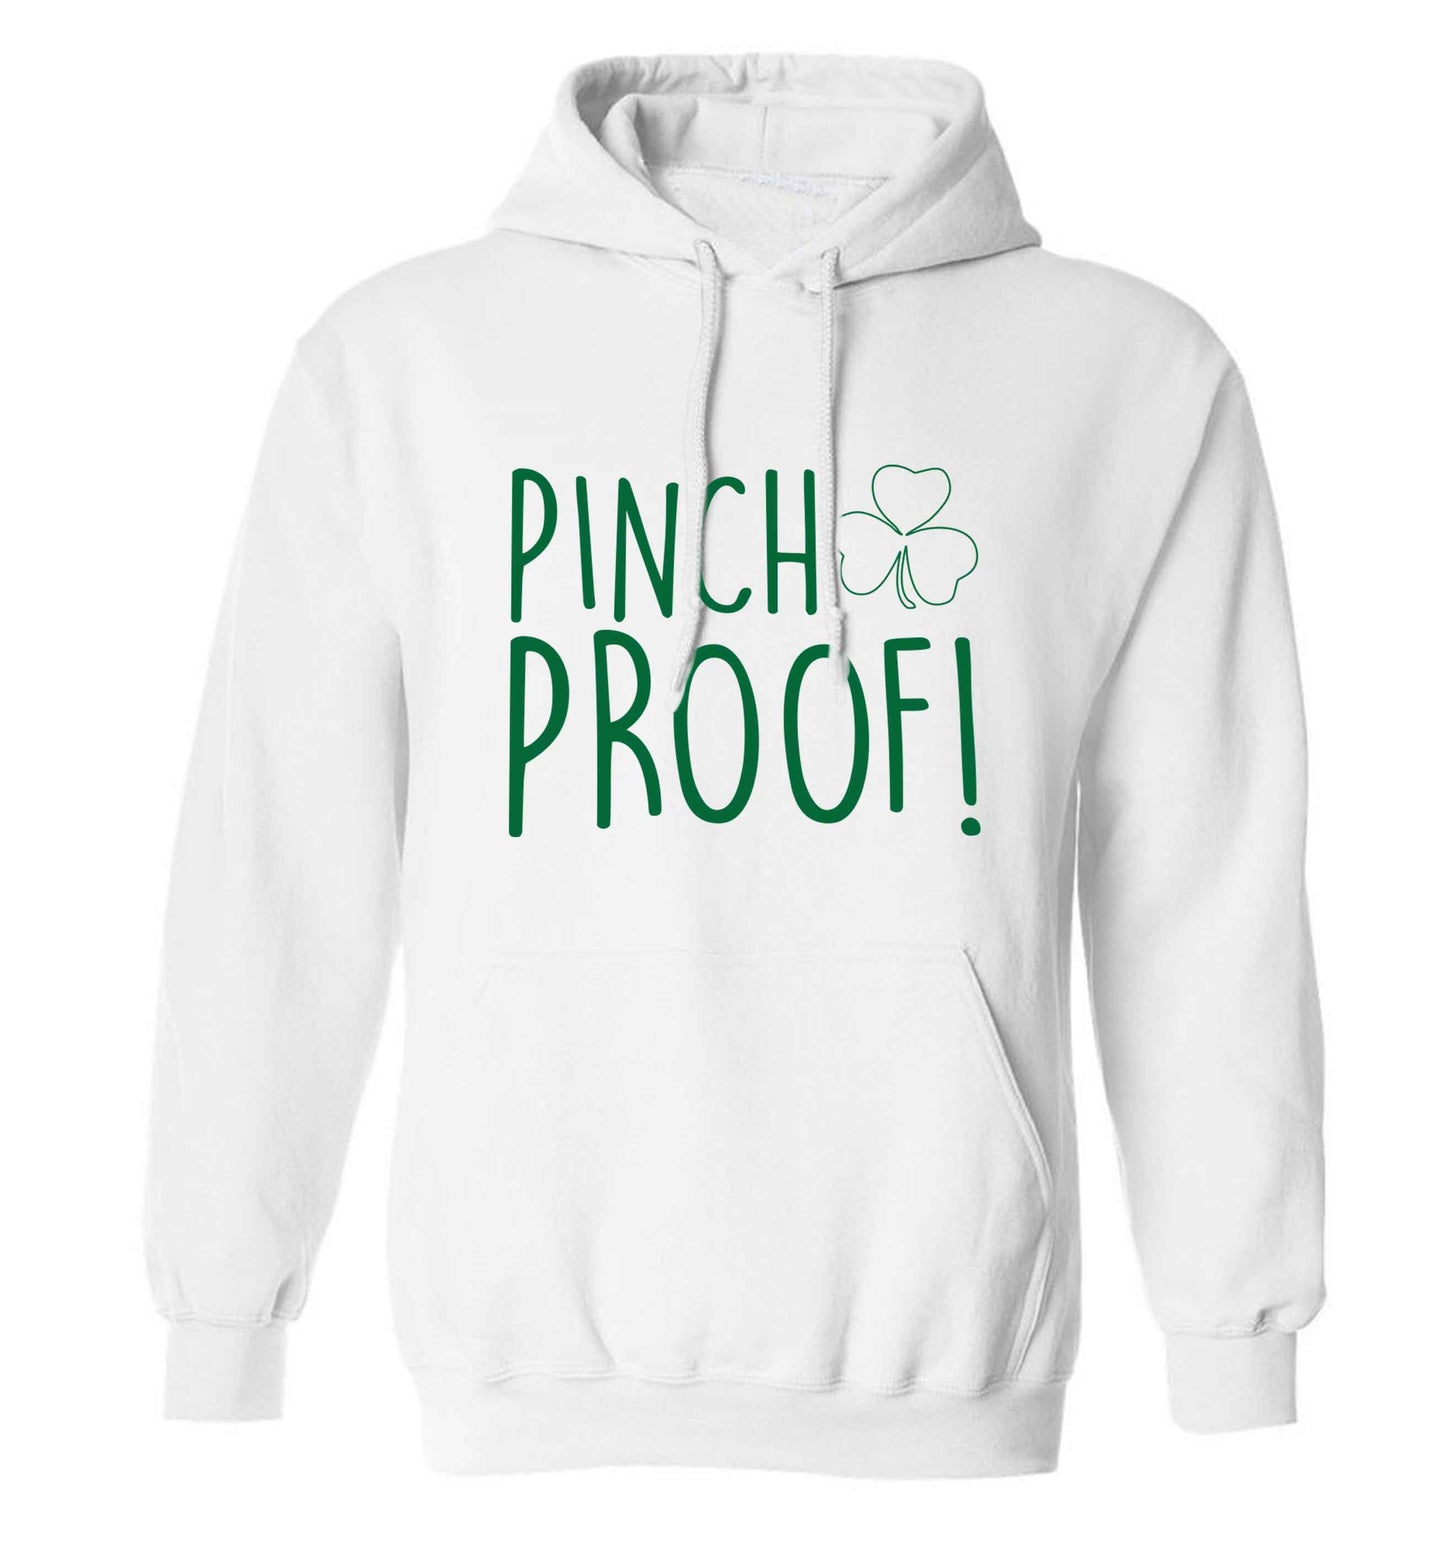 Pinch Proof adults unisex white hoodie 2XL